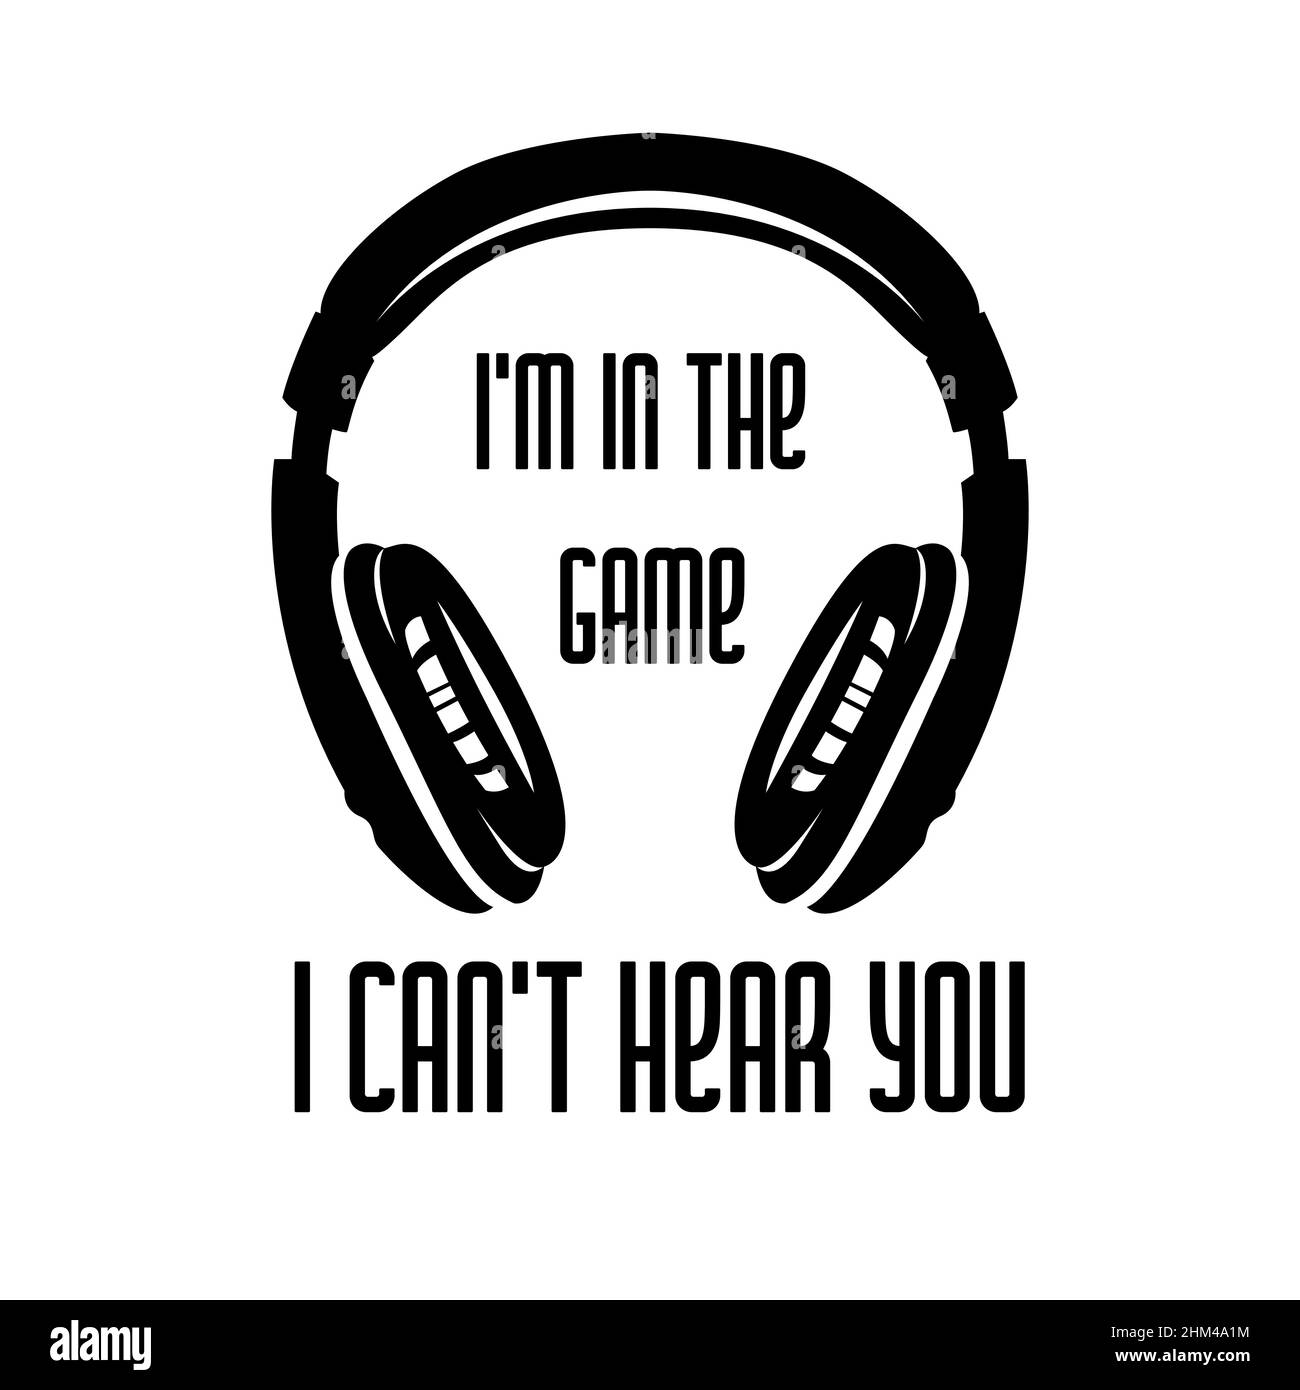 Headphones monochrome graphic. Musical t-shirt design. I m in the game, I can t hear you quote text phrase quotation. Isolated vector illustrations. Stock Vector